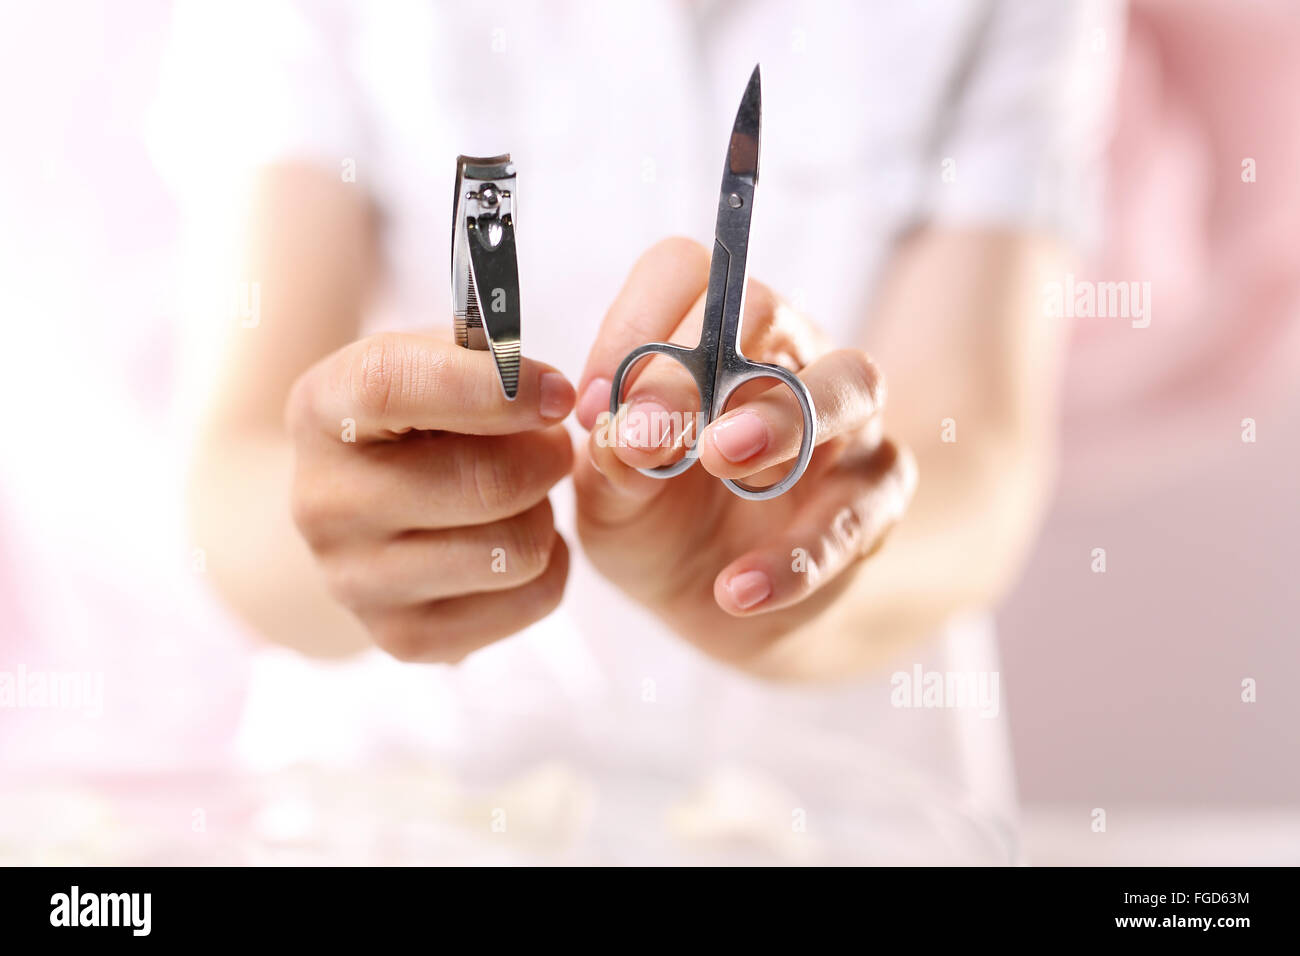 Manicure, nail clipping. Manicure tools. Clipper or scissors?. Clipping nails, hand care. Nail styling Stock Photo